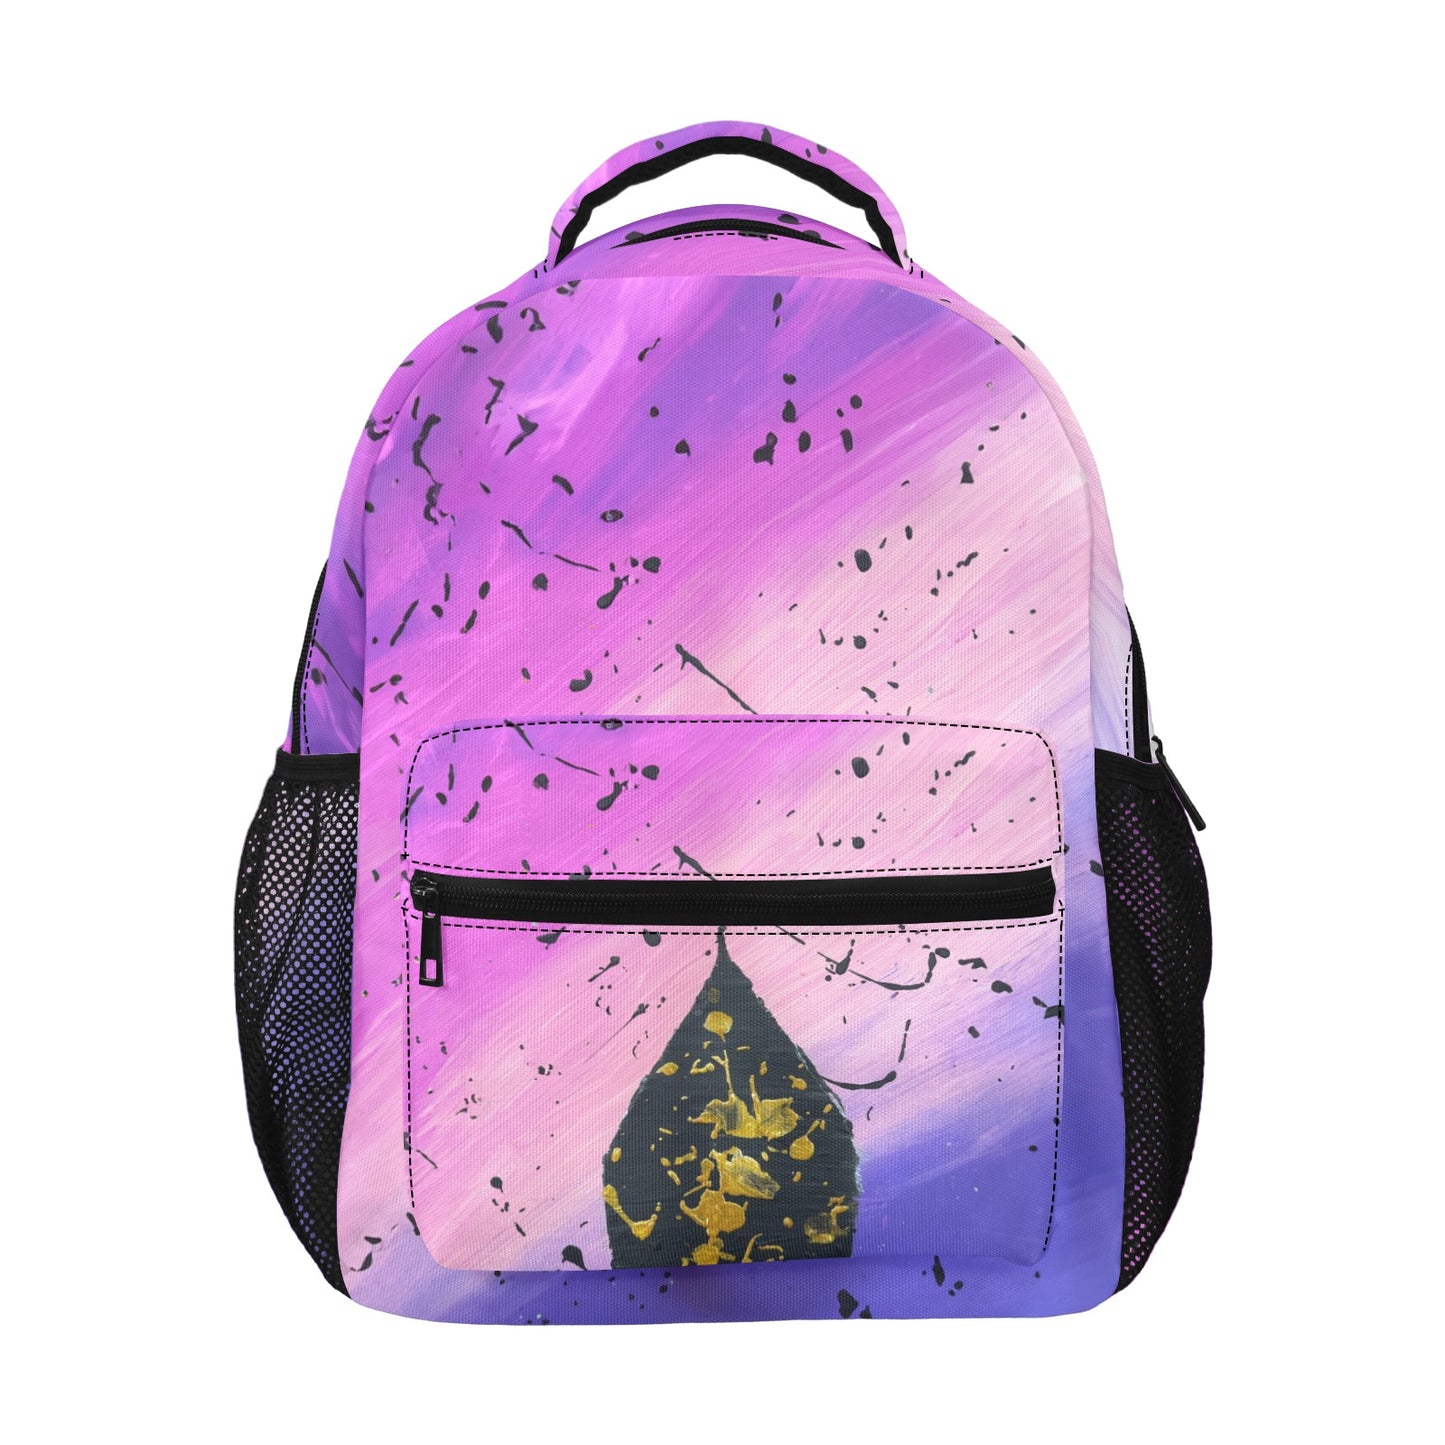 Black Flame - by Chana 17-inch All Over Print Casual Backpack